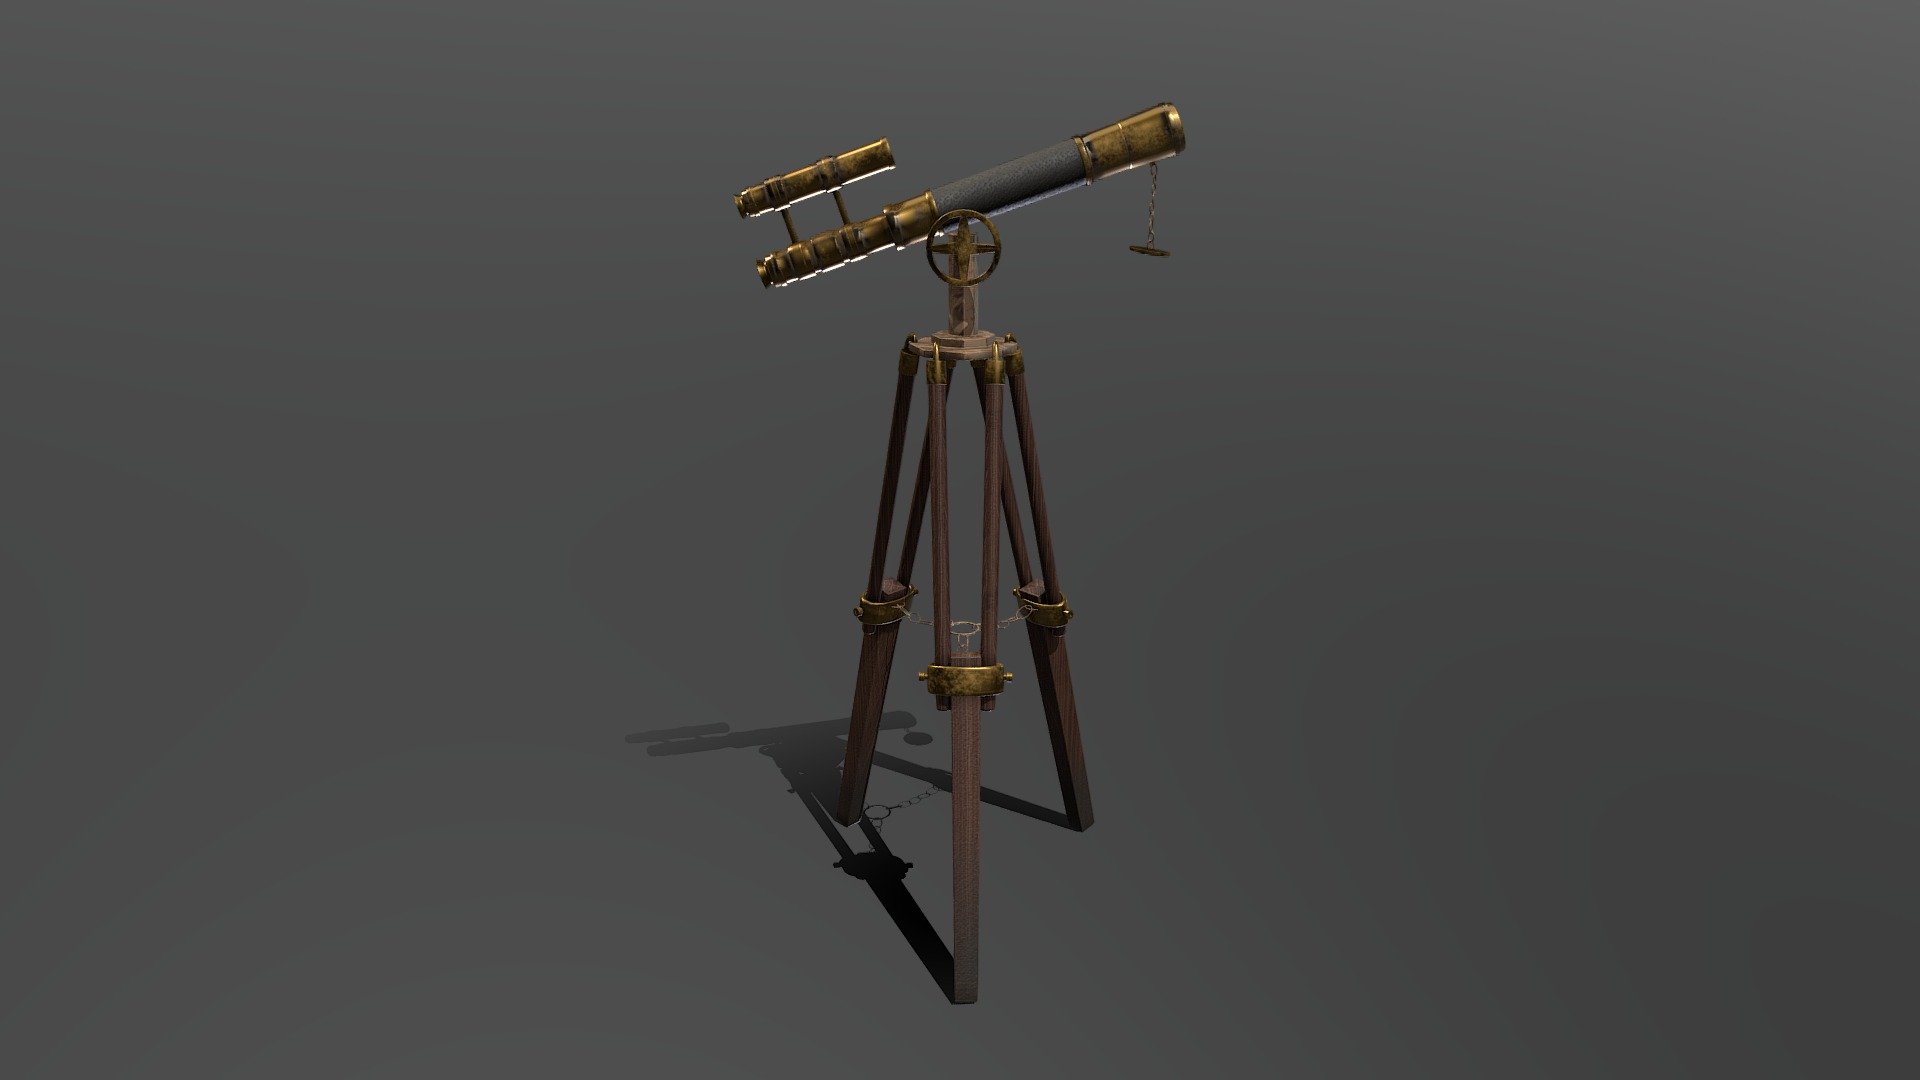 Detailed model of medieval telescope for your project. Wood, gold, copper and leather. 
Created in blender, painted in substance.
Here is the video where i create this model!
https://www.youtube.com/watch?v=6h05lkg94IY&amp;ab_channel=AlenaChaschina - Medieval telescope - Download Free 3D model by chaschinkaa 3d model